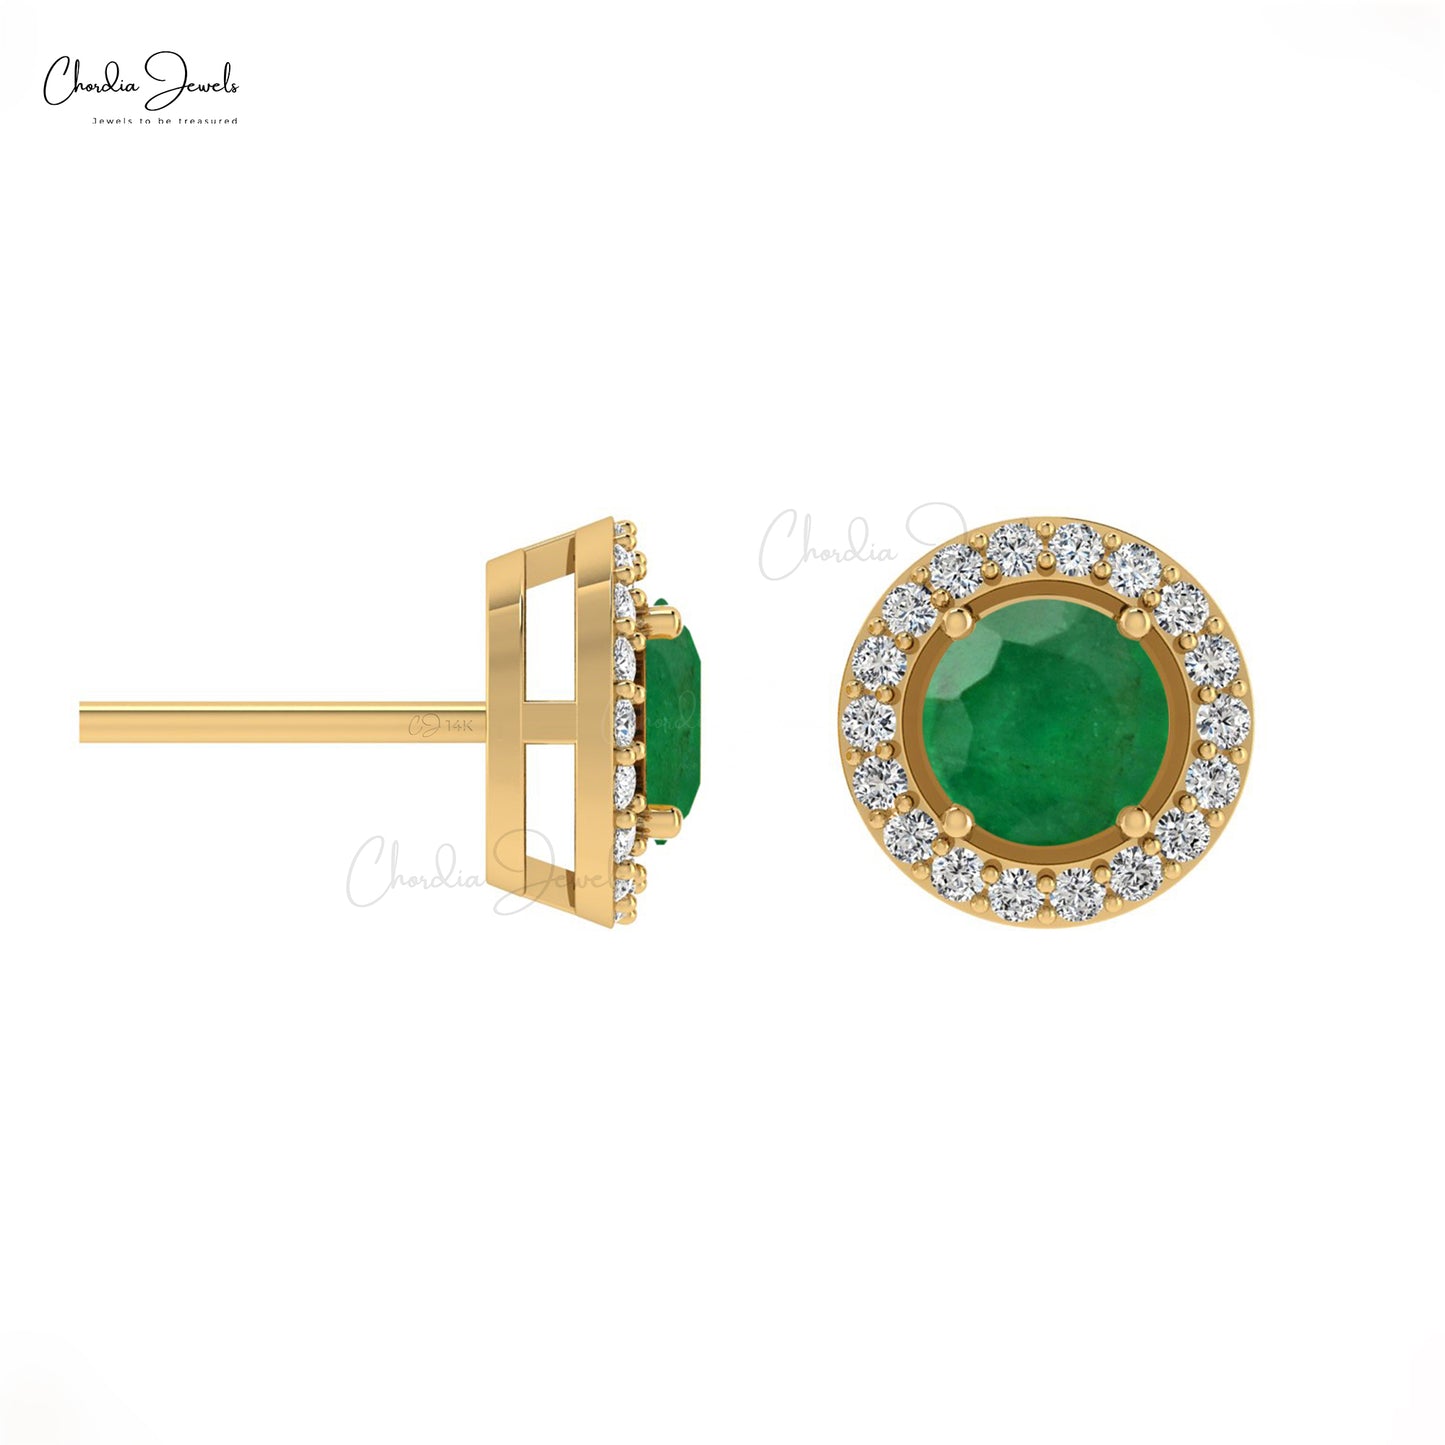 Complete your overall look with these green emerald earrings.